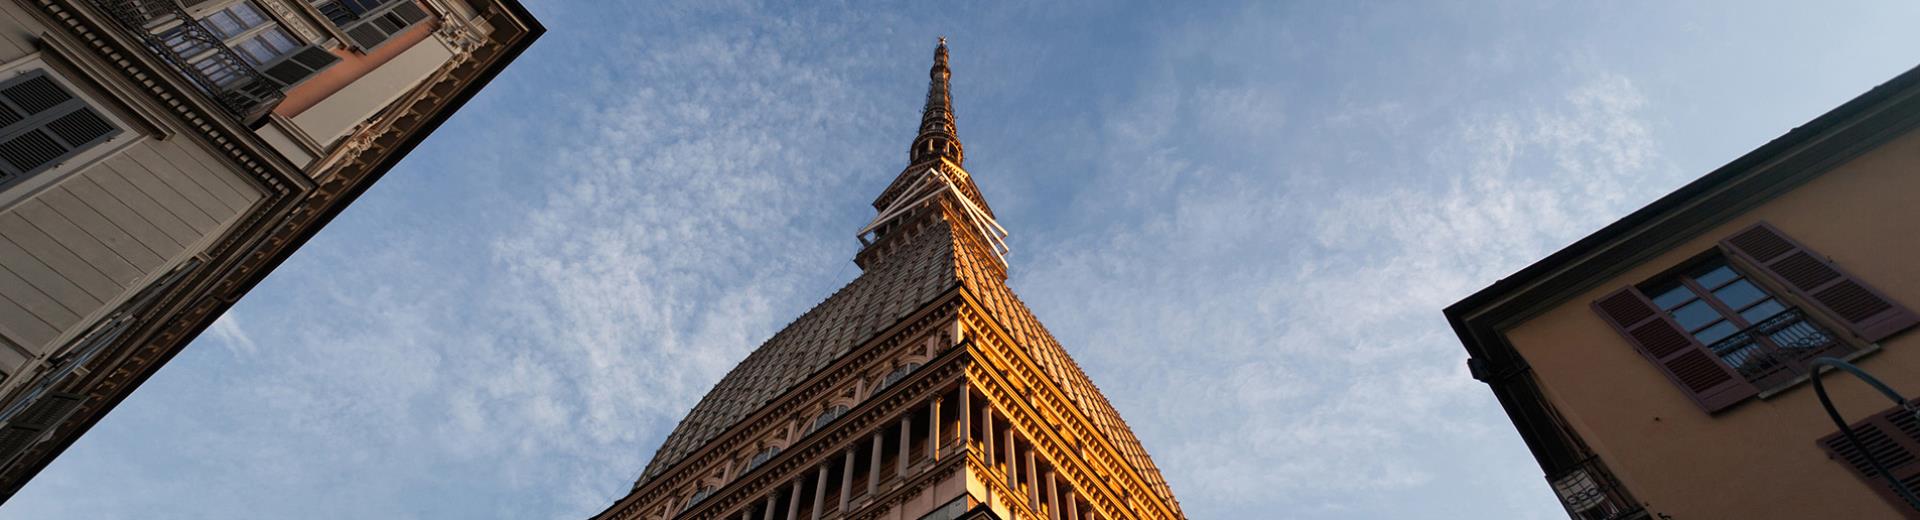 Would you like to visit the Museum of Cinema and the Mole Antonelliana? Stay at the BW Plus Hotel Le Rondini just 20 minutes away. Book now!